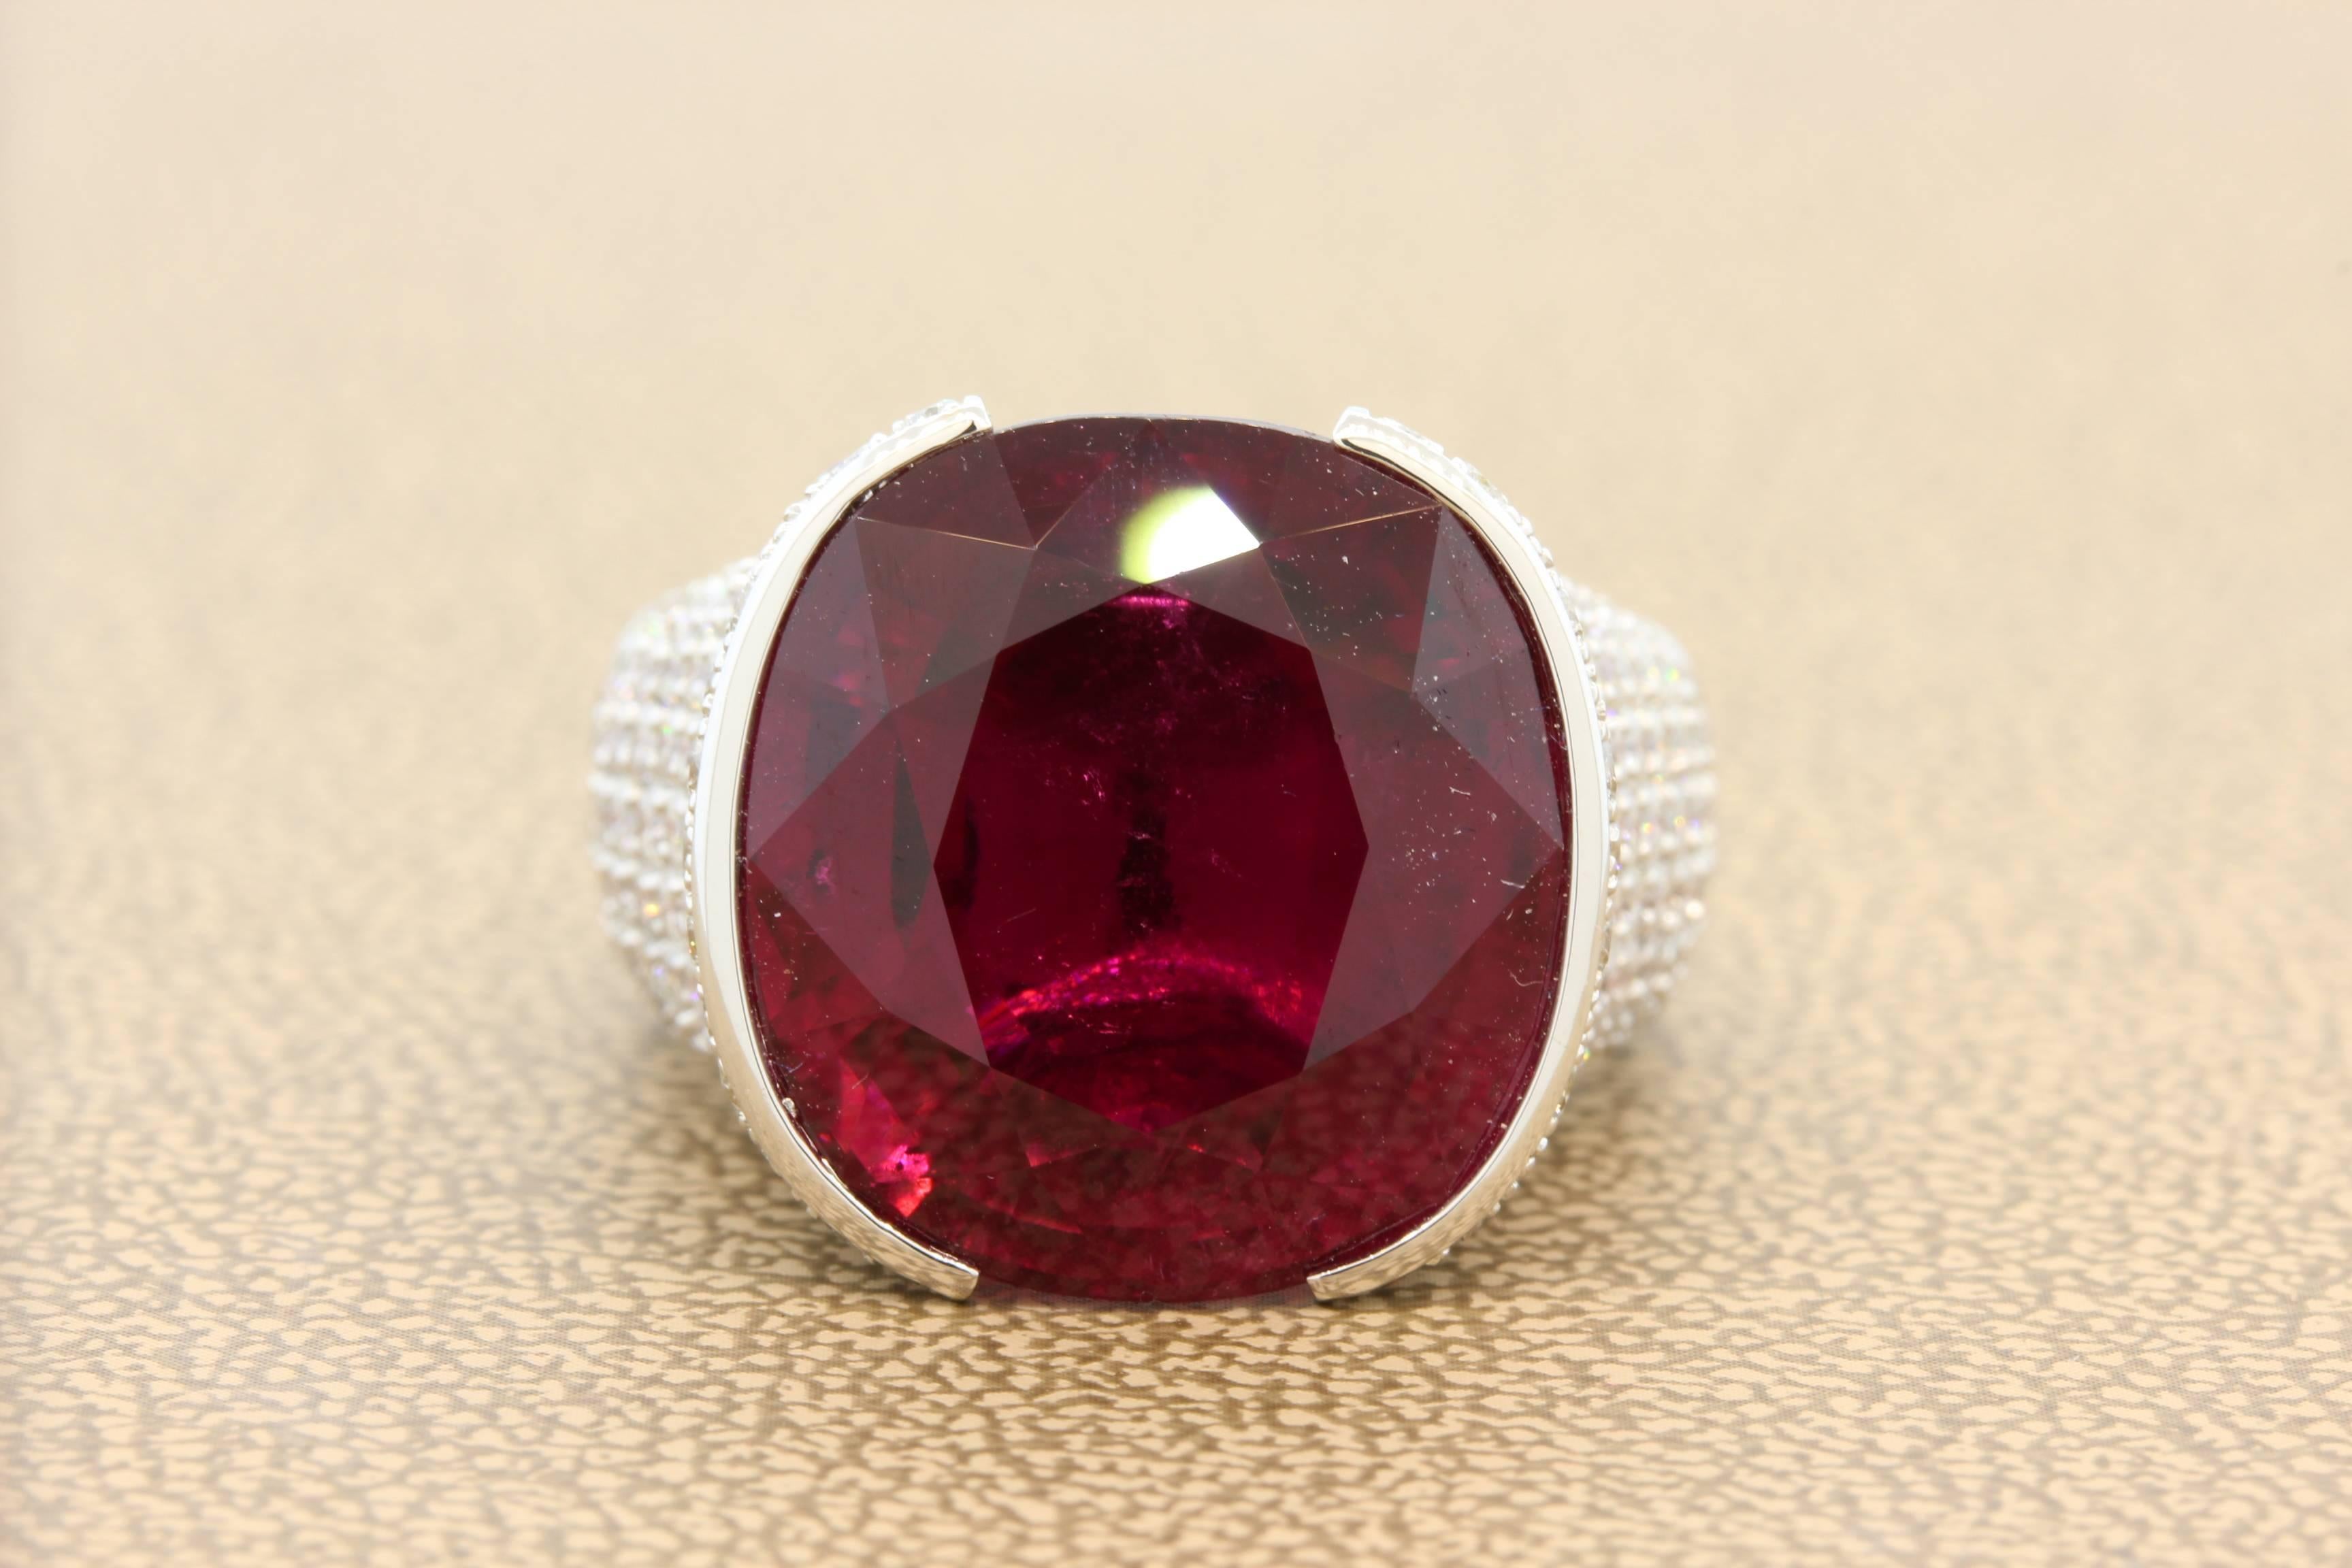 The word Gem is often used carelessly when describing a stone. In this case we feel very confident to describe this deeply saturated raspberry red 18.10 carat rubellite as a royal gem. 
The saturation of color is amazing along with the transparency